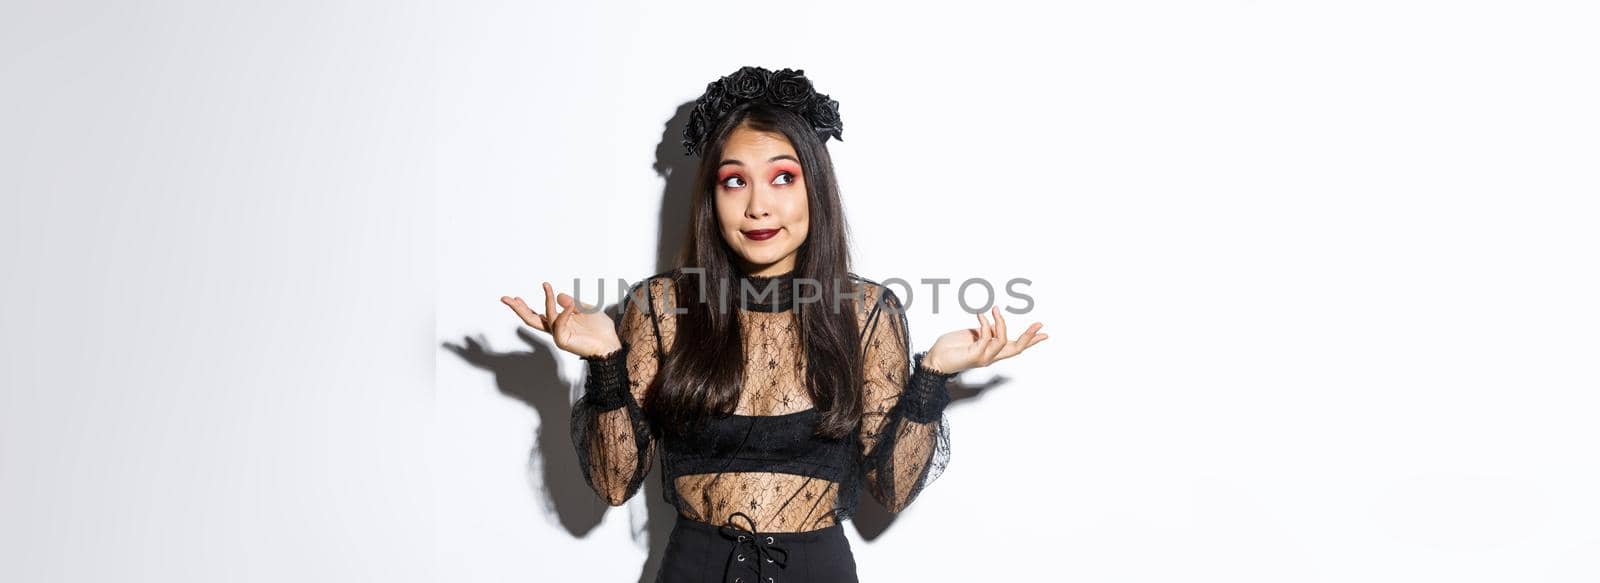 Image of clueless asian girl dressed-up as a witch, shrugging and smiling, looking upper left corner at halloween banner or your logo, standing over white background in gothic dress.